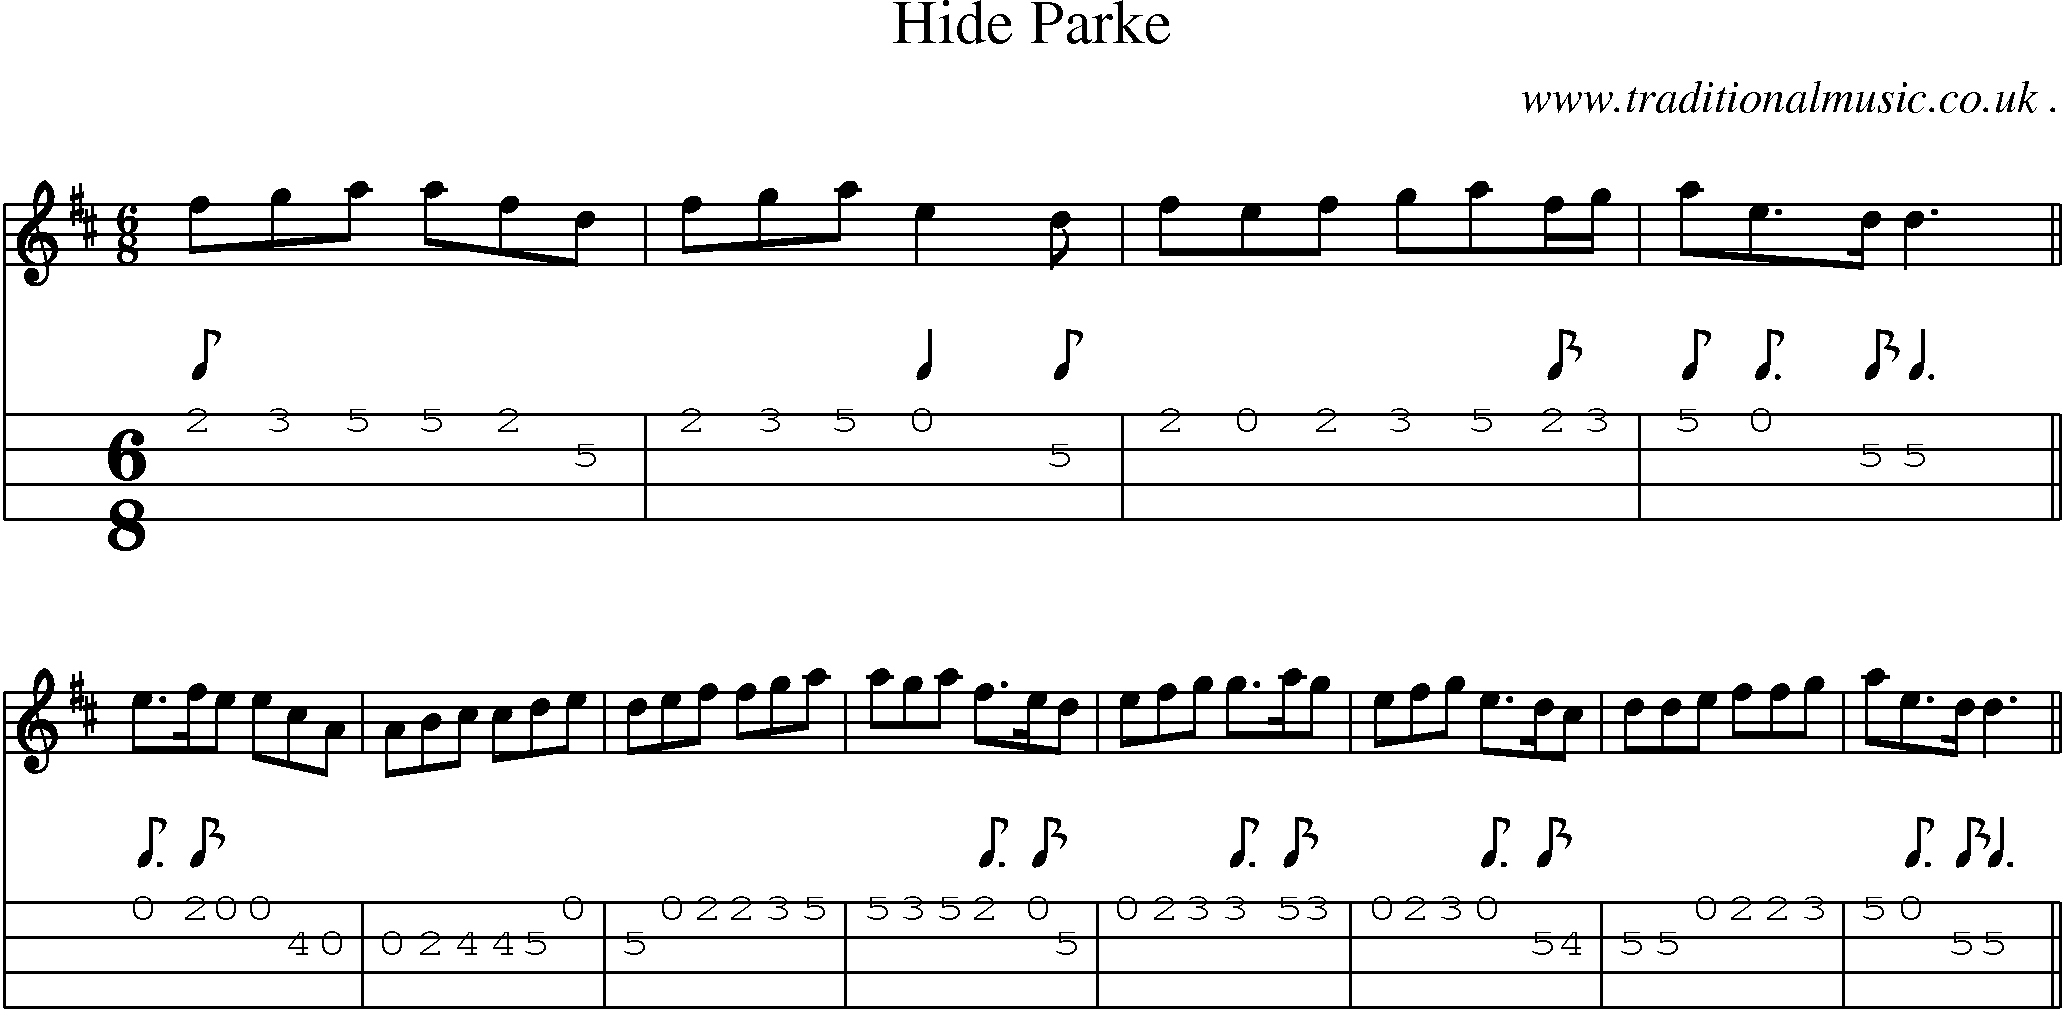 Sheet-music  score, Chords and Mandolin Tabs for Hide Parke